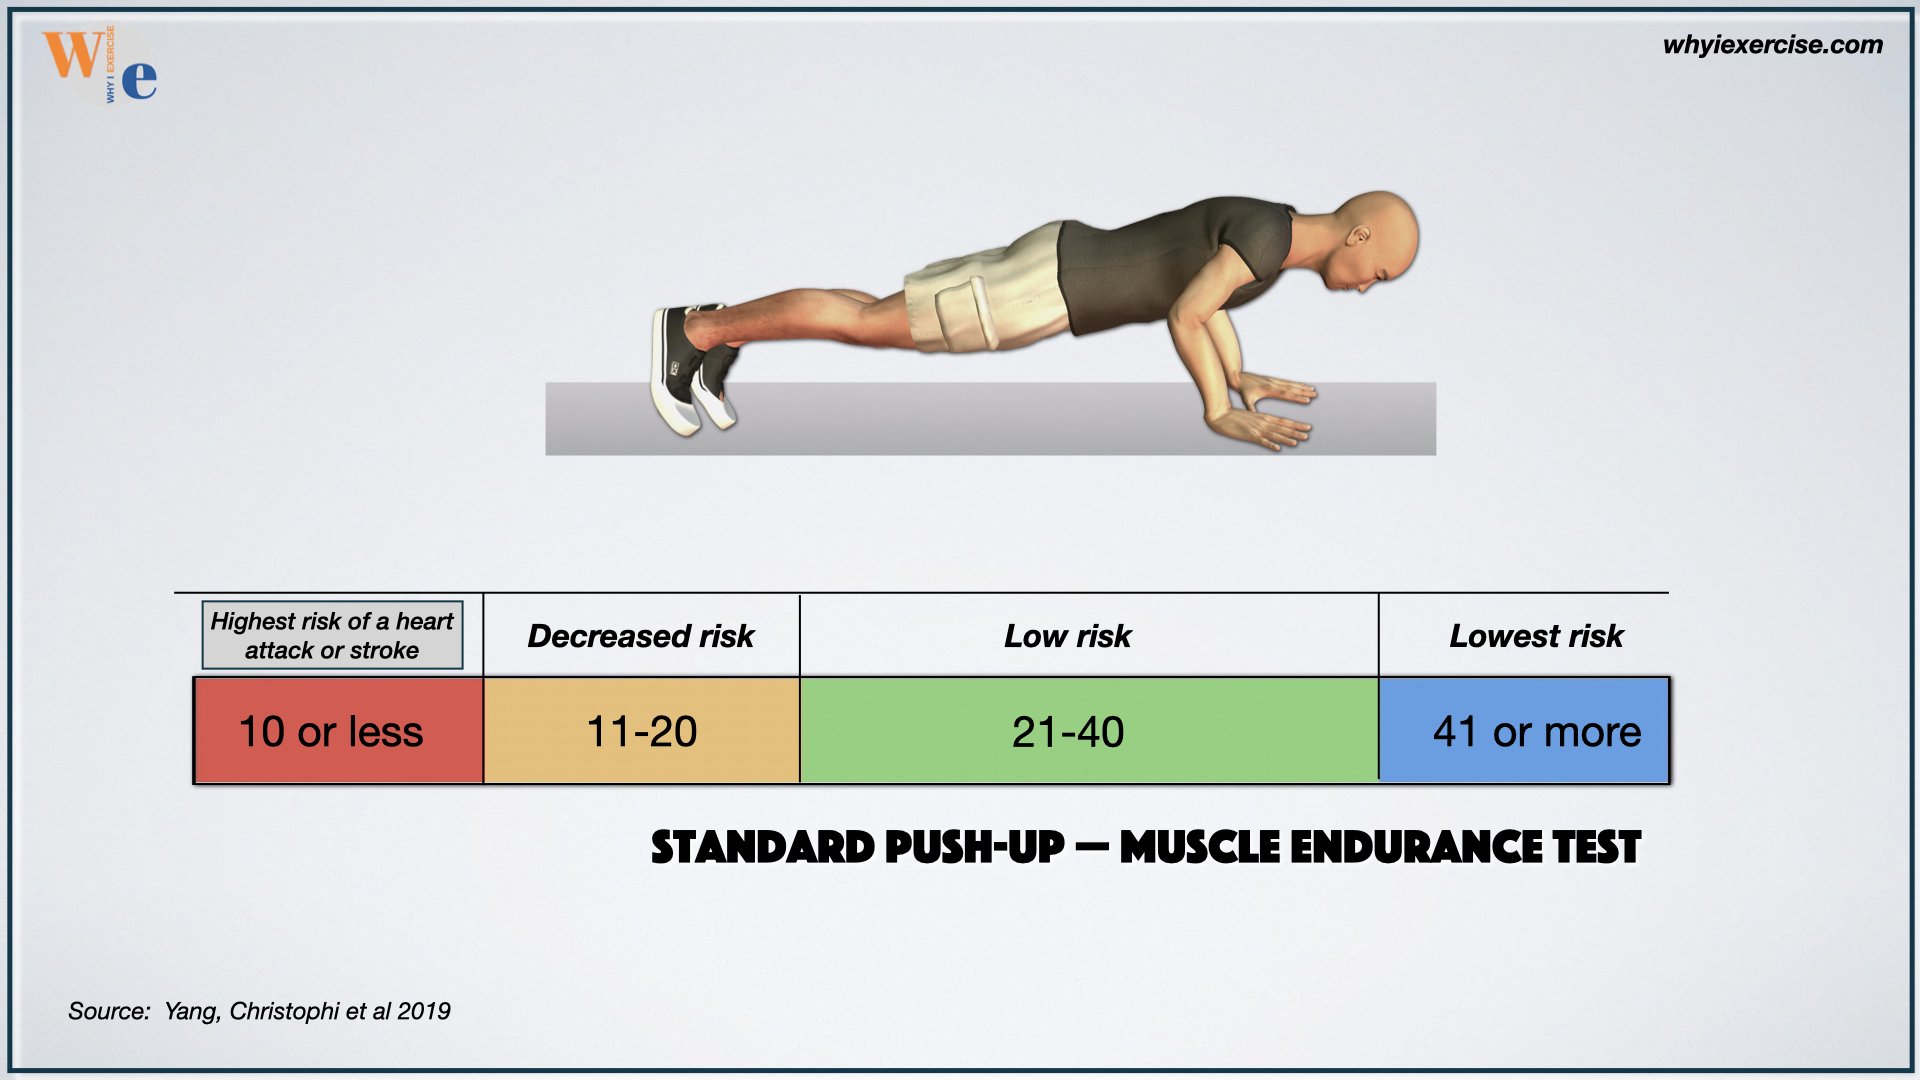 upper body muscle endurance and health benefits, push-ups for men